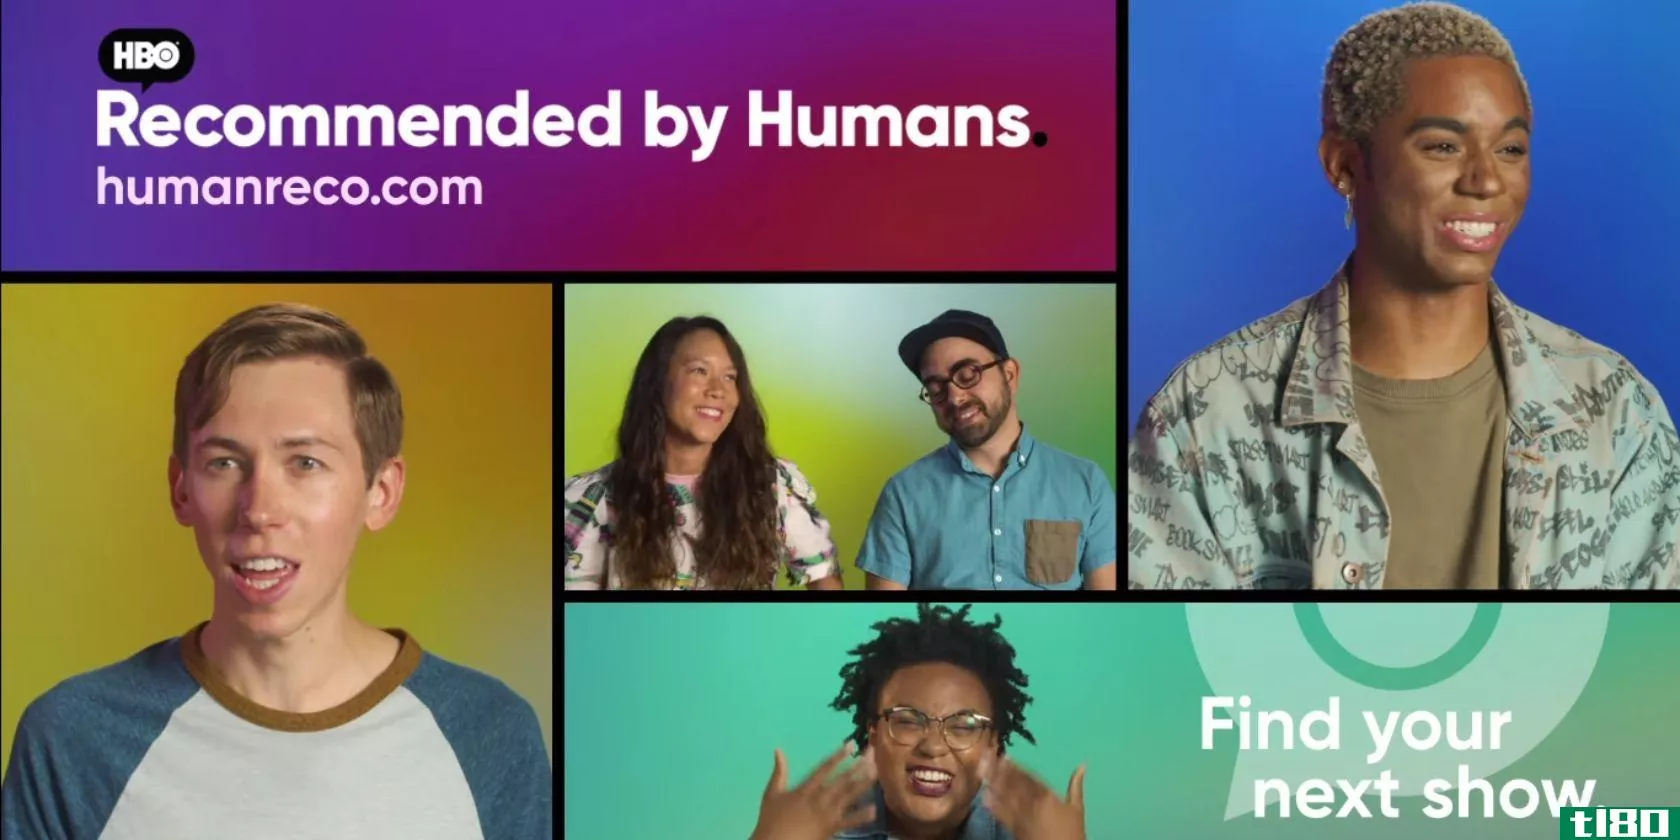 hbo-recommended-by-humans